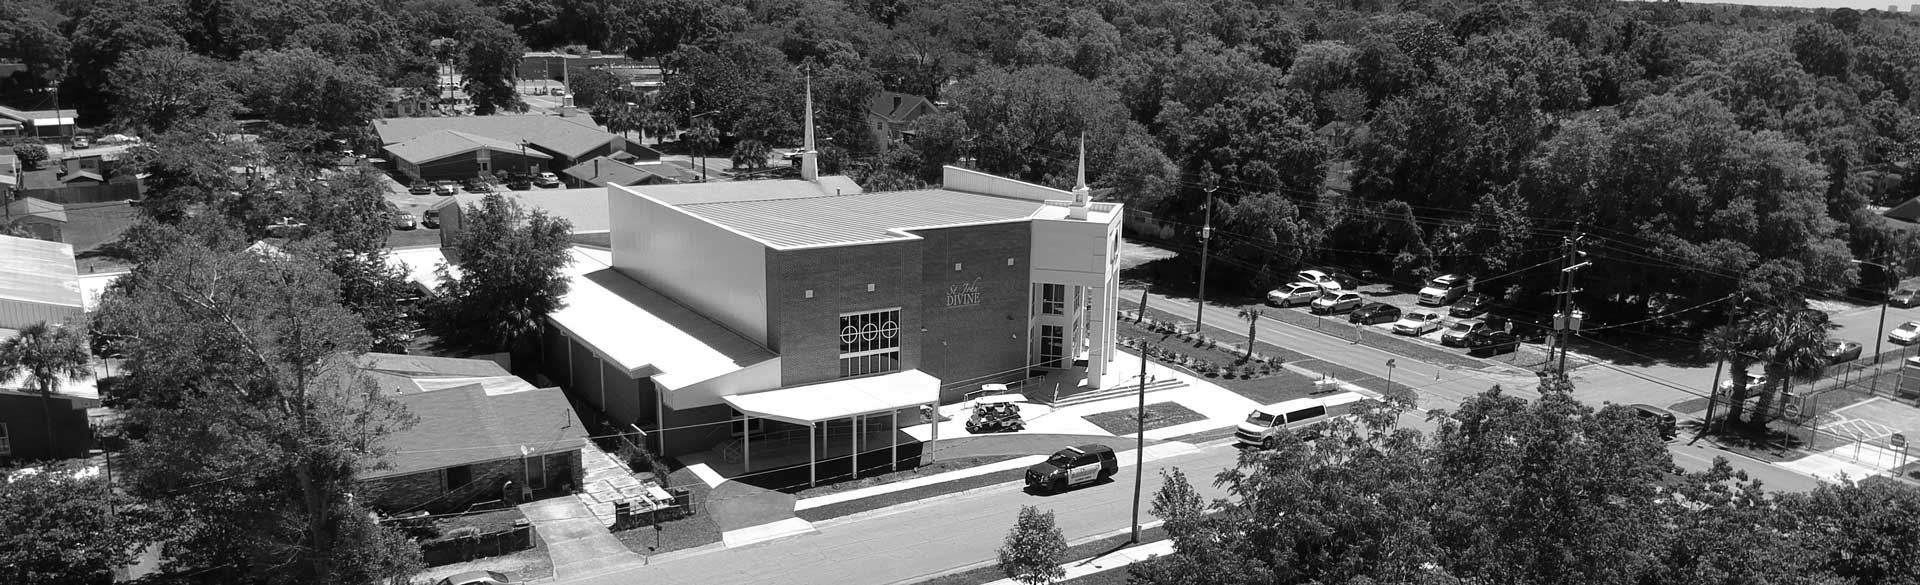 Aerial view of St. john Divine Missionary Baptist Church